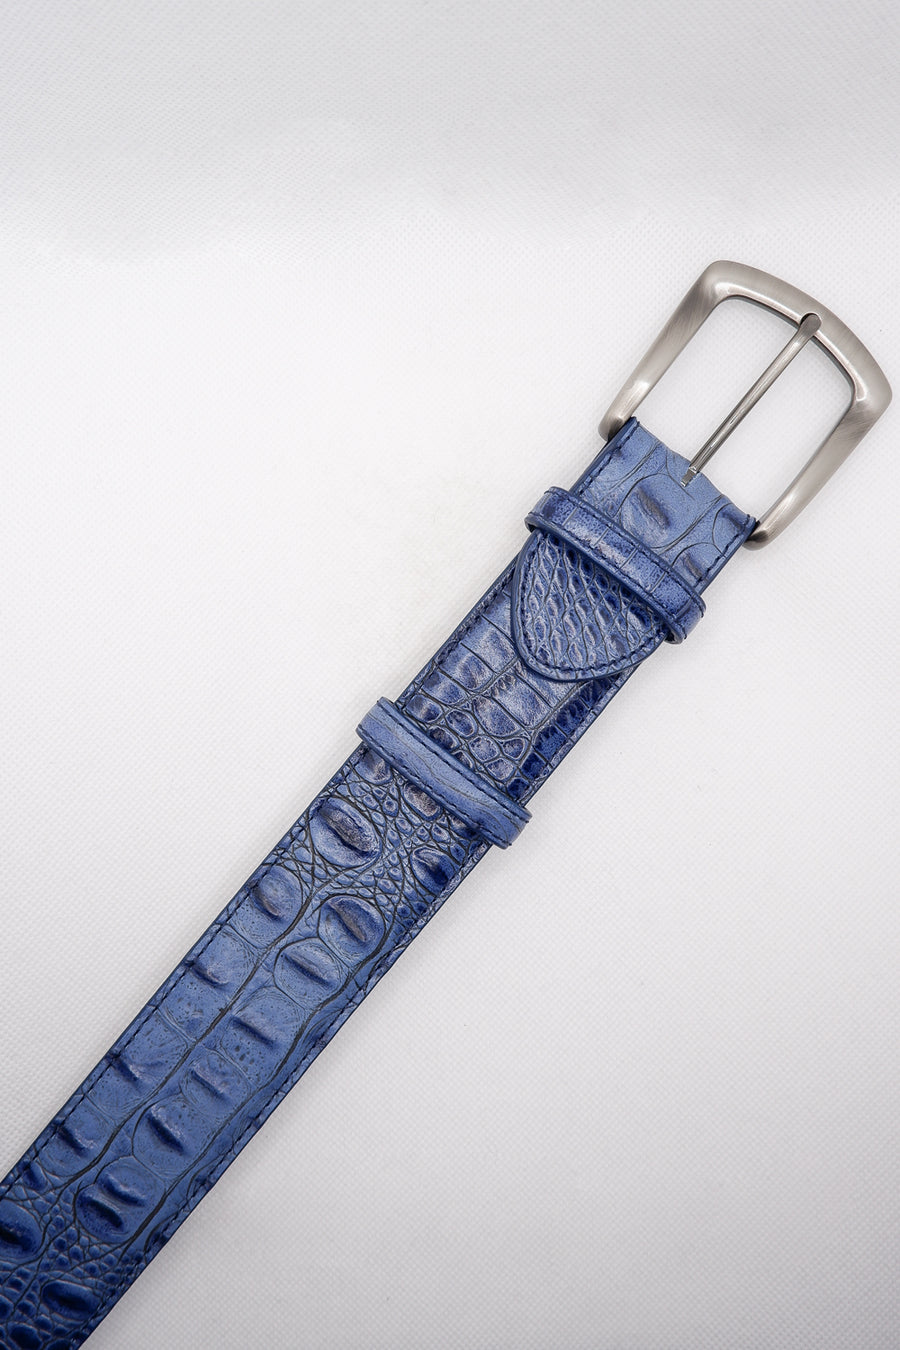 Buy the Elliot Rhodes Mock Croc Belt Dark Navy at Intro. Spend £50 for free UK delivery. Official stockists. We ship worldwide.